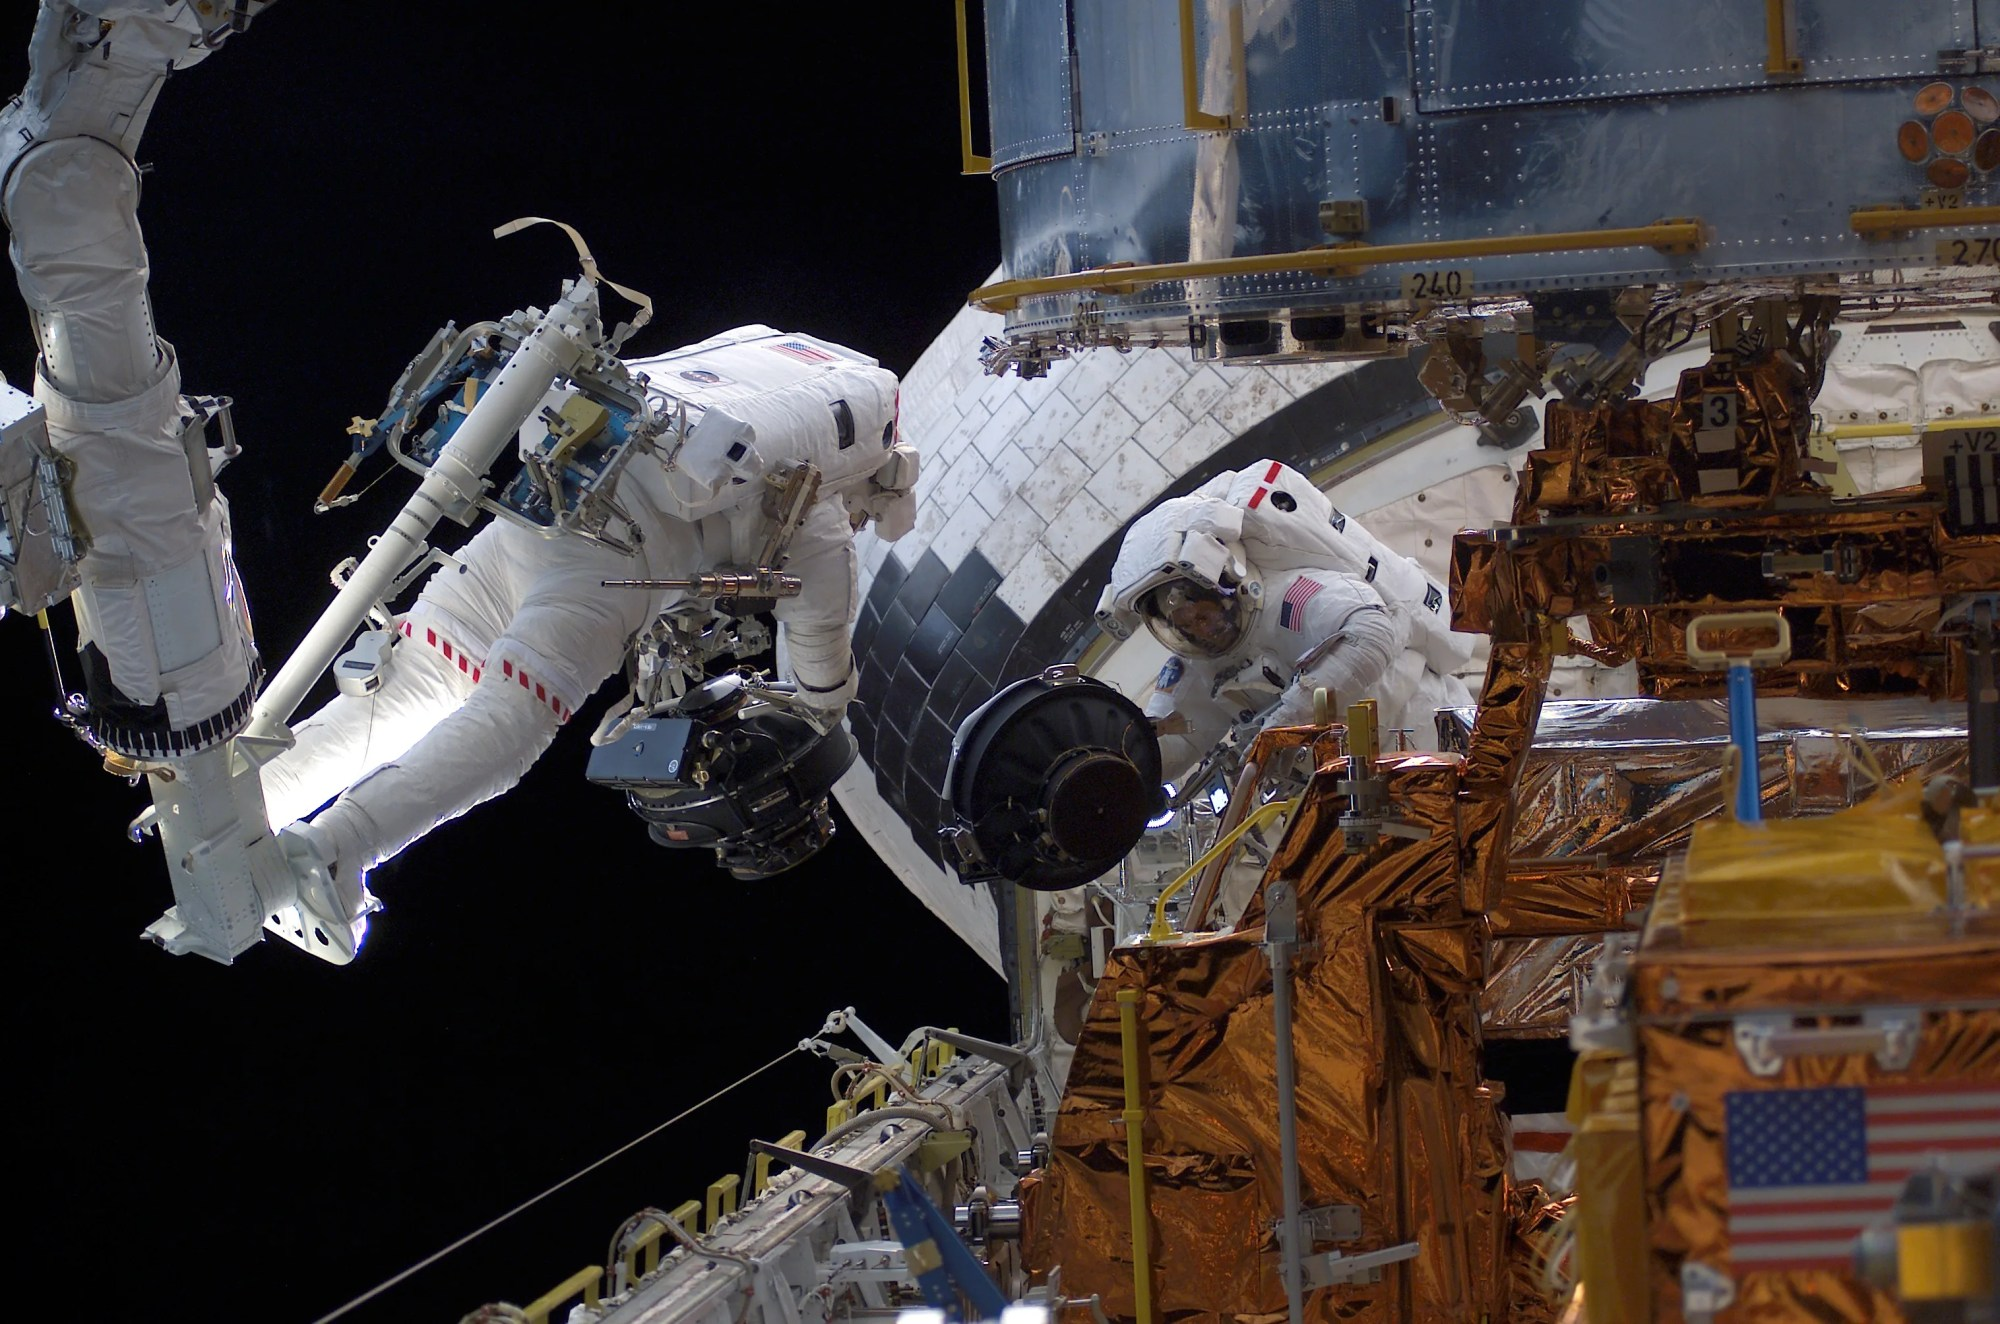 Two astronauts in white suits on an EVA replacing instruments on the Hubble space telescope.